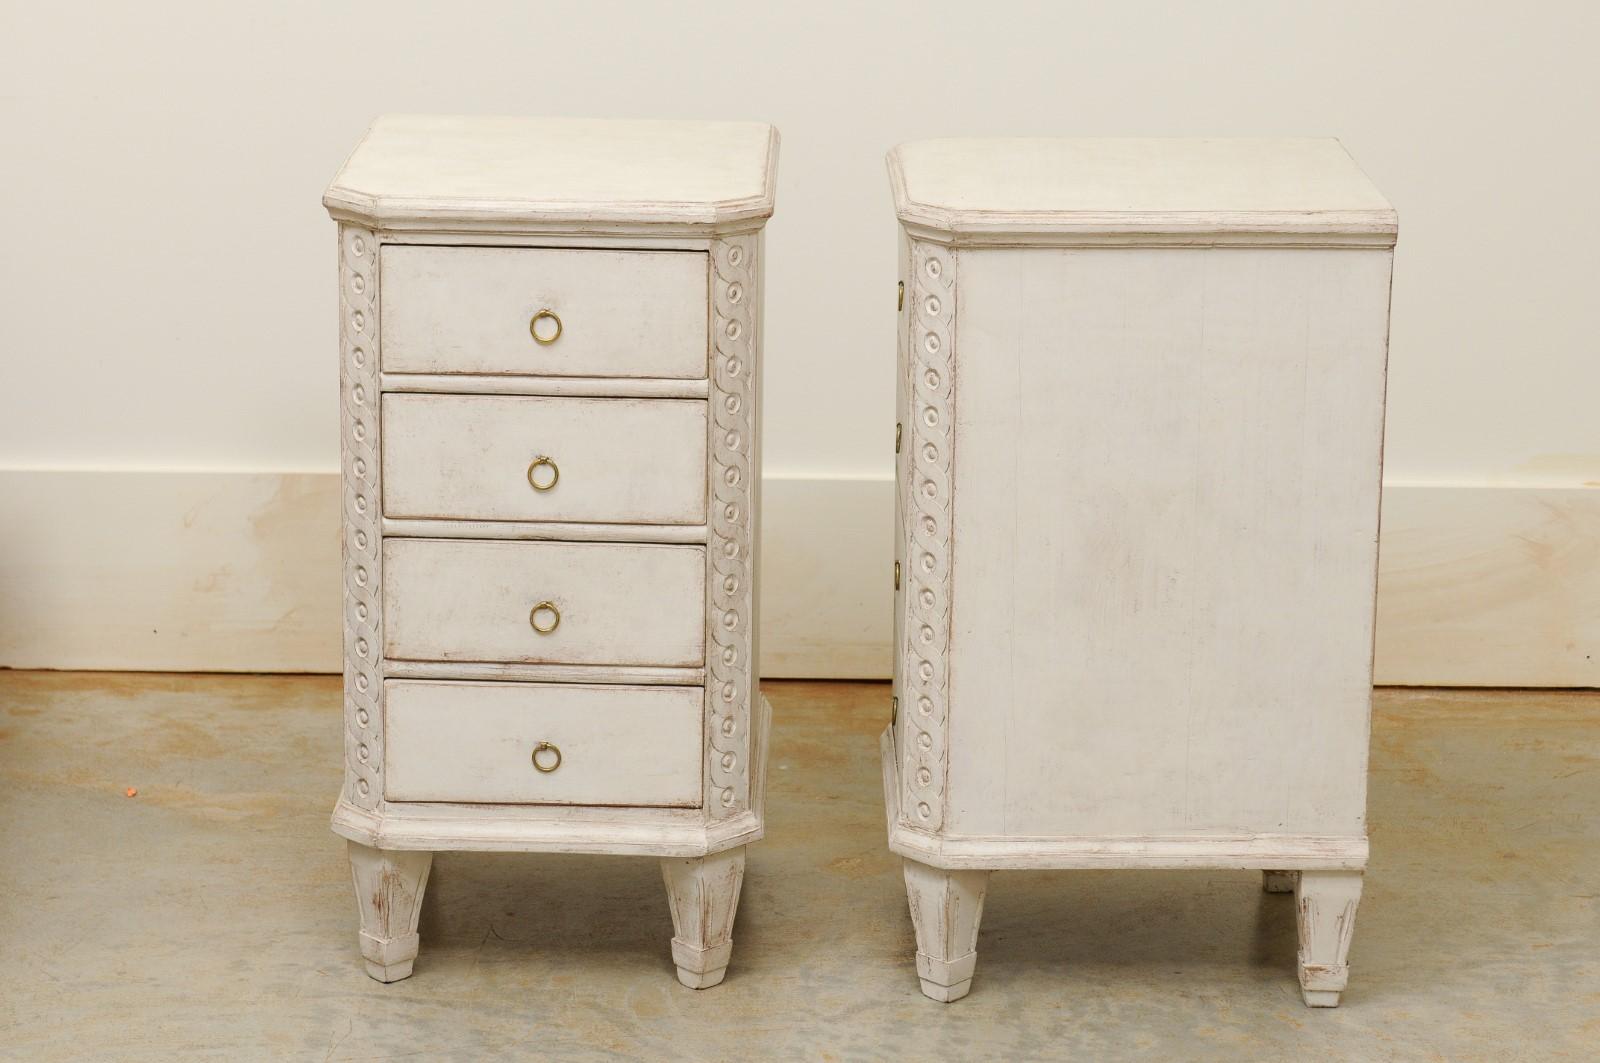 Pair of Swedish Neoclassical Style Painted Nightstand Tables with Guilloches 8